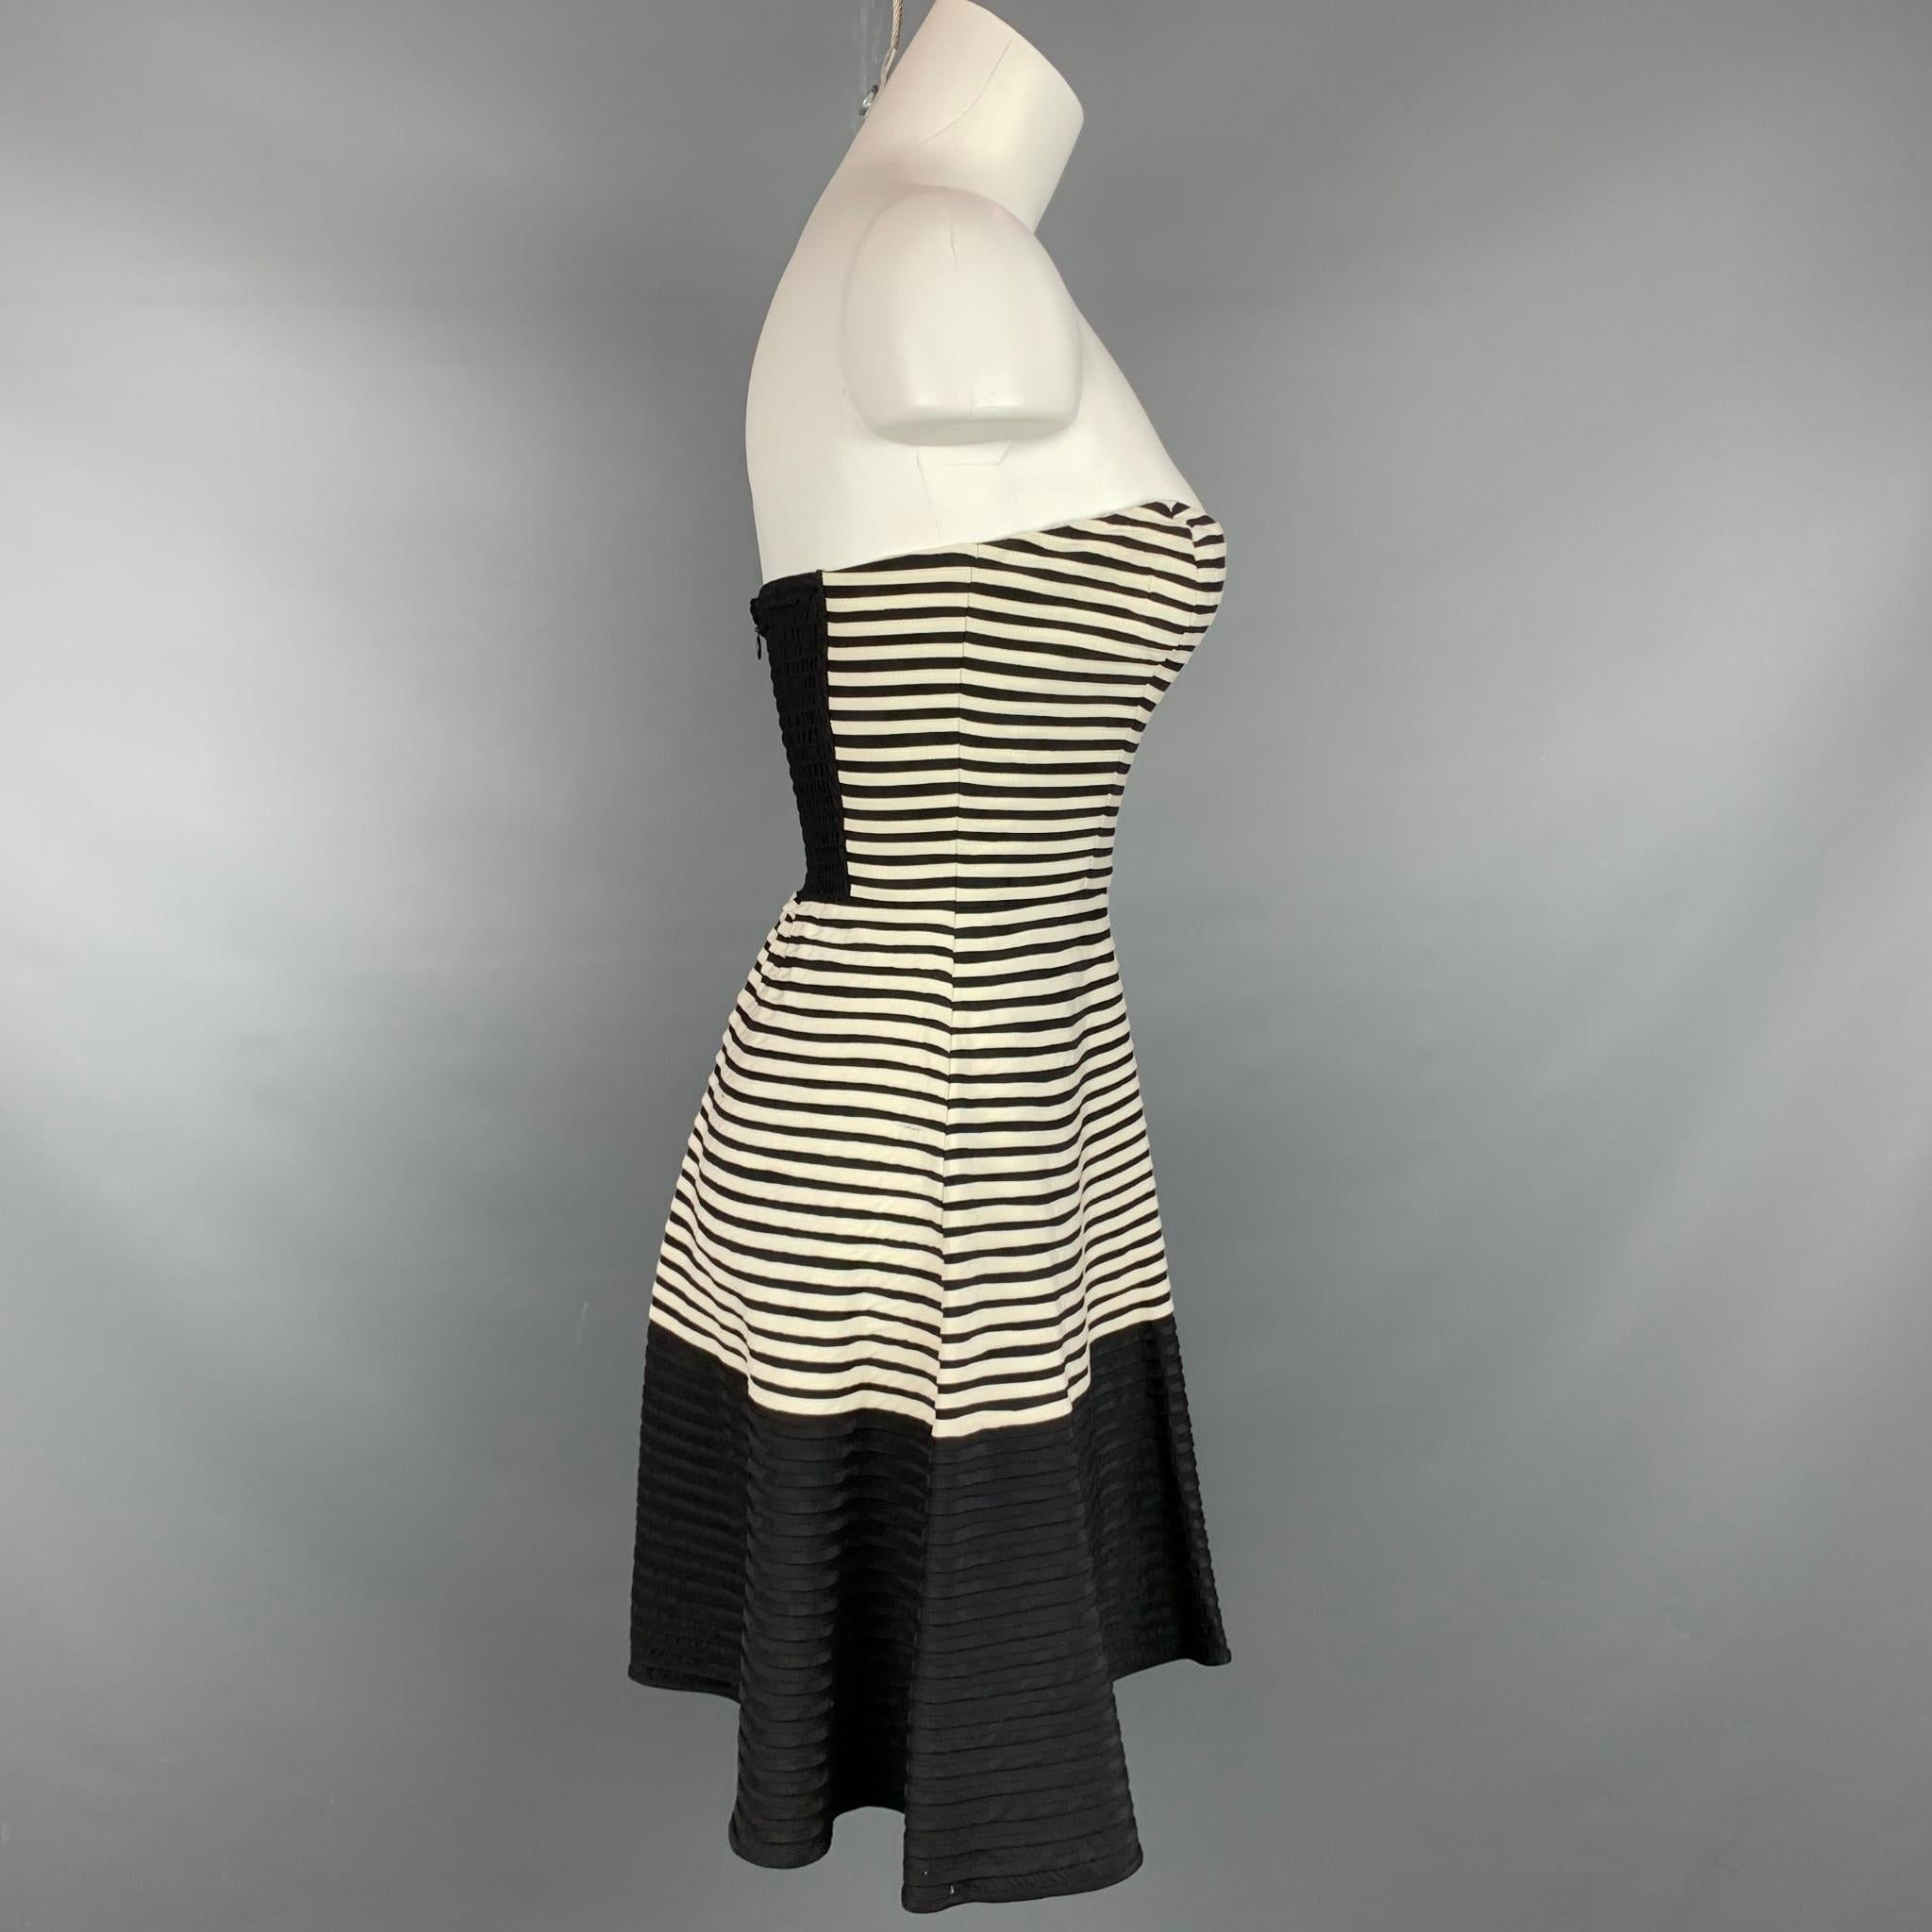 PARKER dress comes in a black & white stripe silk featuring a strapless style, circle skirt, and a back zipper closure. 

New With Tags.
Marked: XS
Original Retail Price: $297.00

Measurements:

Bust: 28 in.
Waist: 22 in.
Hip: 36 in.
Length: 24.5